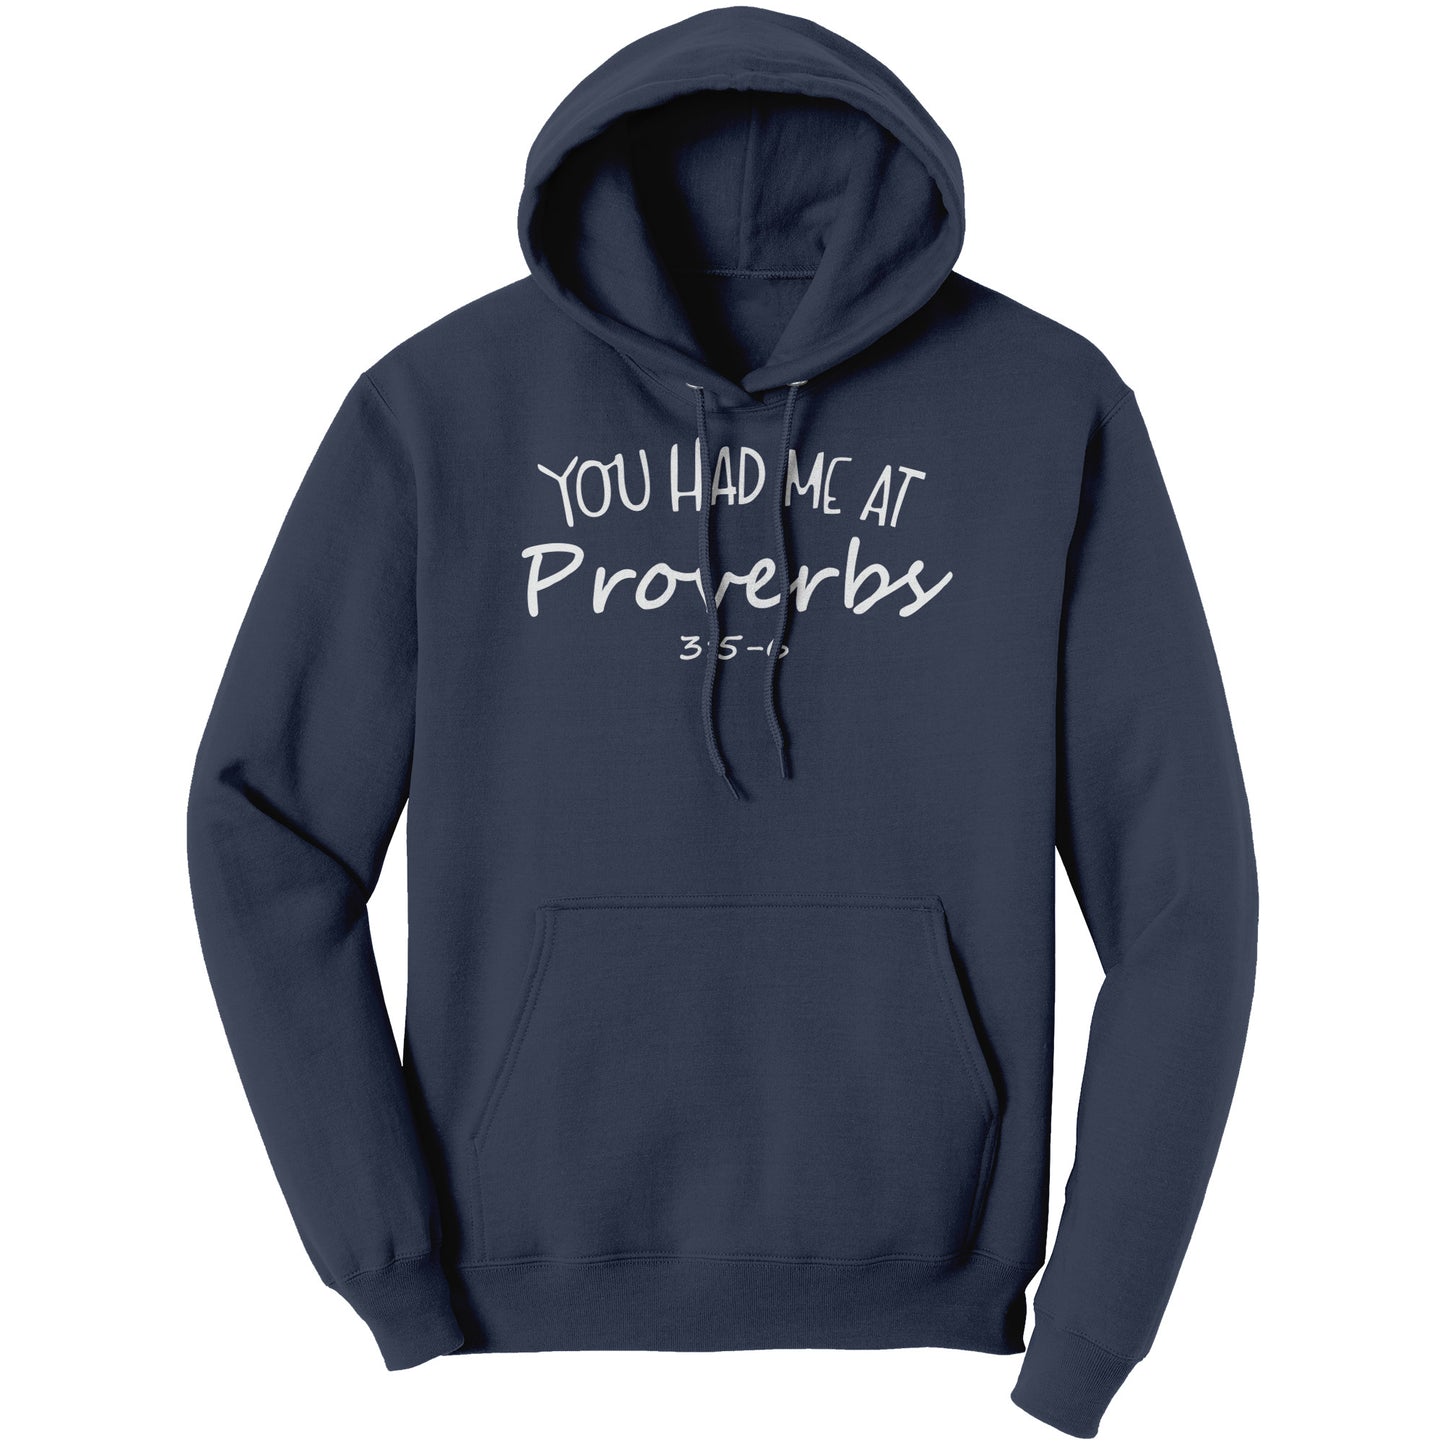 You Had Me At Proverbs 3:5-6 Hoodie Part 2